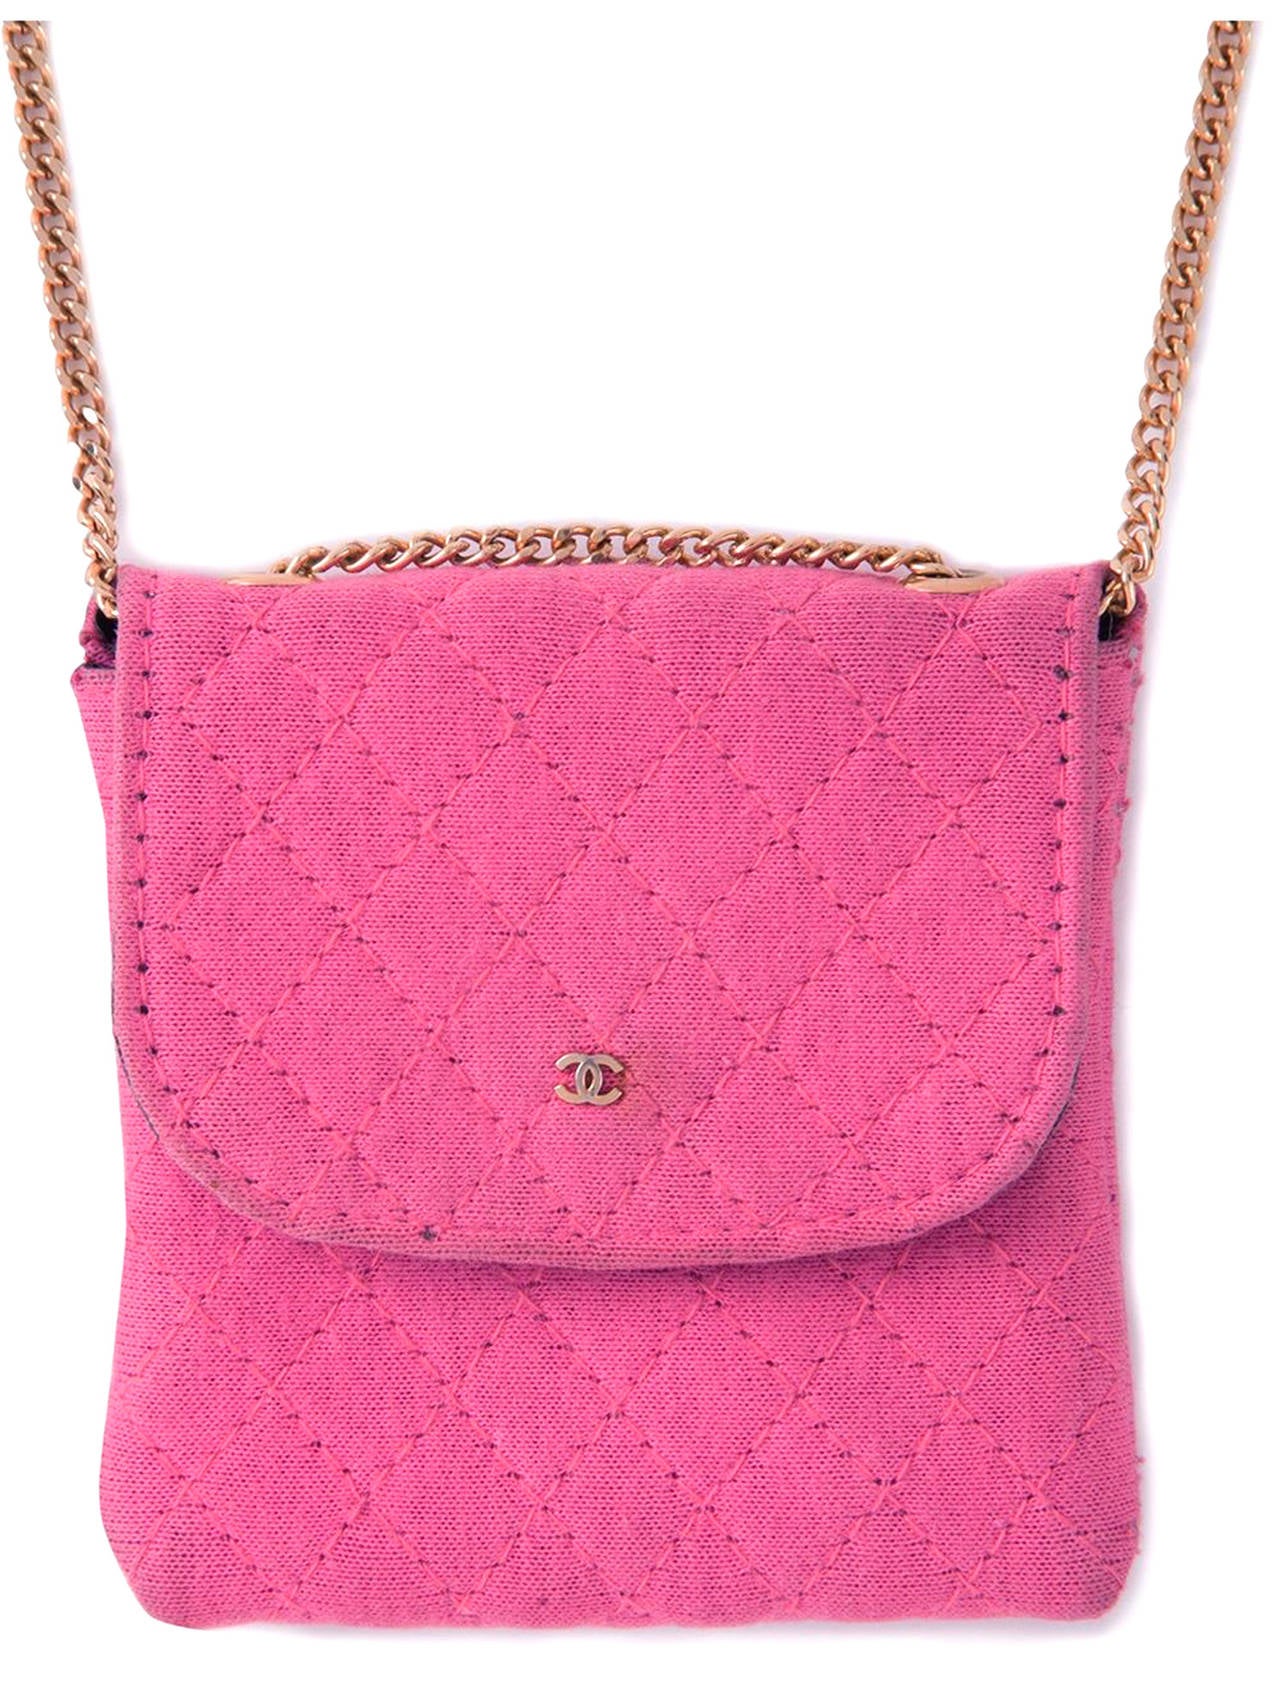 Pink cotton mini quilted bag necklace from Chanel  featuring a snap fastening with a gold-tone logo plaque, an inside black lamb lining with an inside gold Chanel stamp and a long gold tone chain (total76cm).